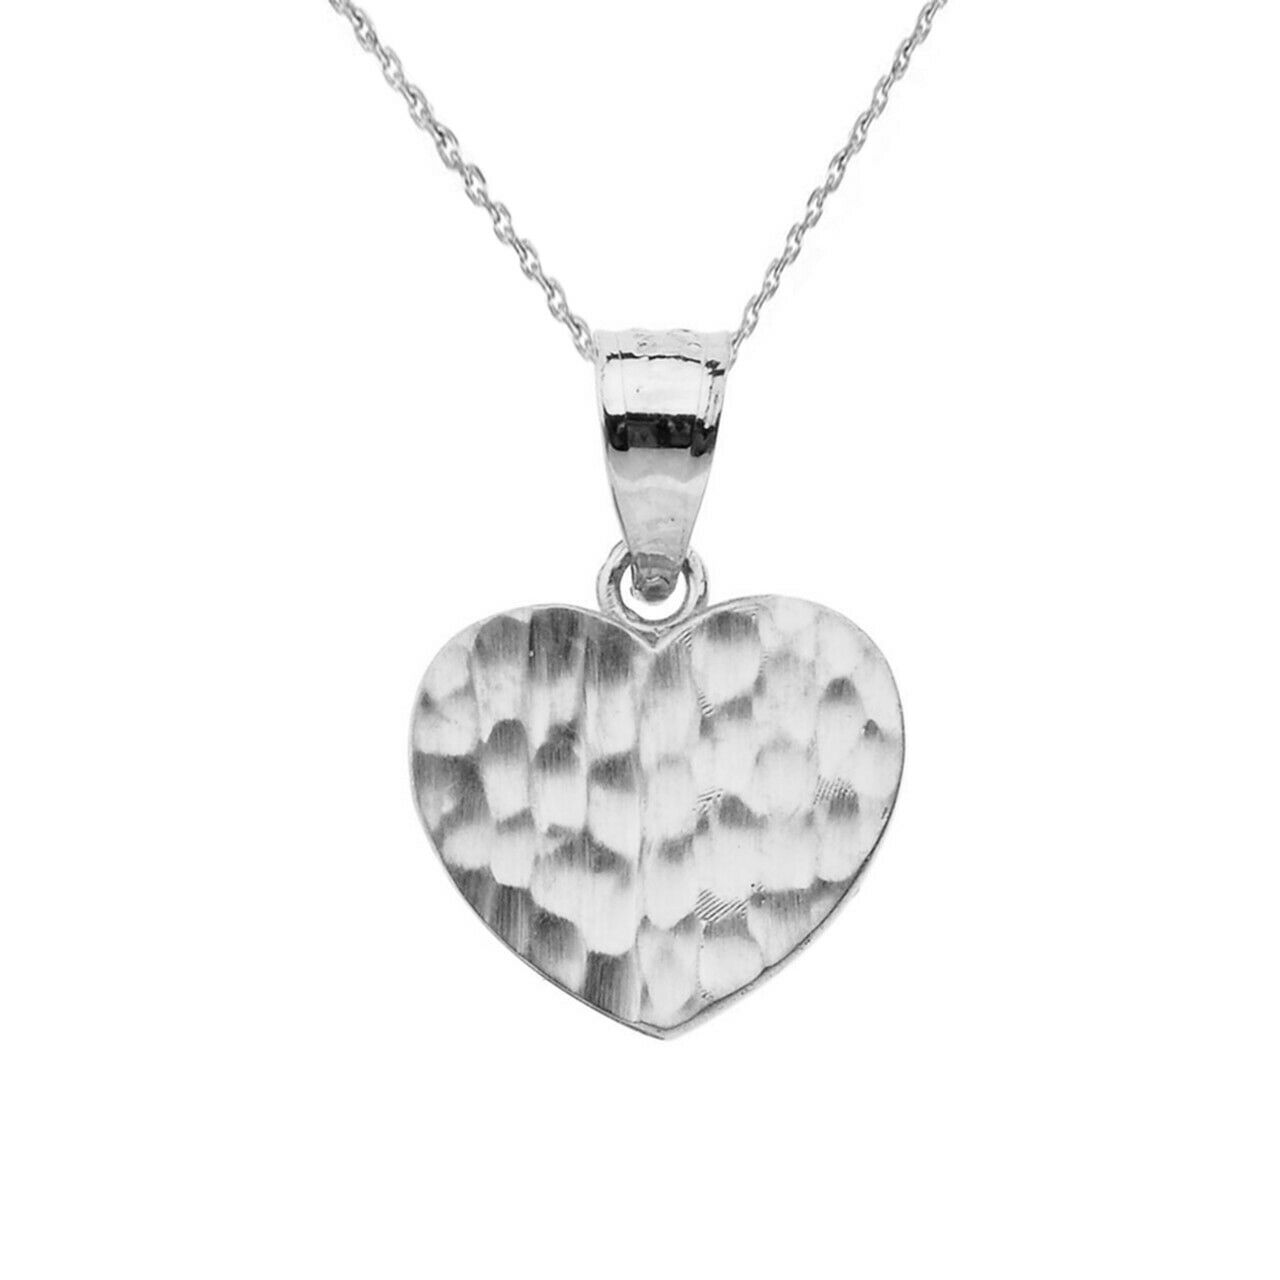 10k White Gold Hammered Mini Small Heart Pendant Necklace